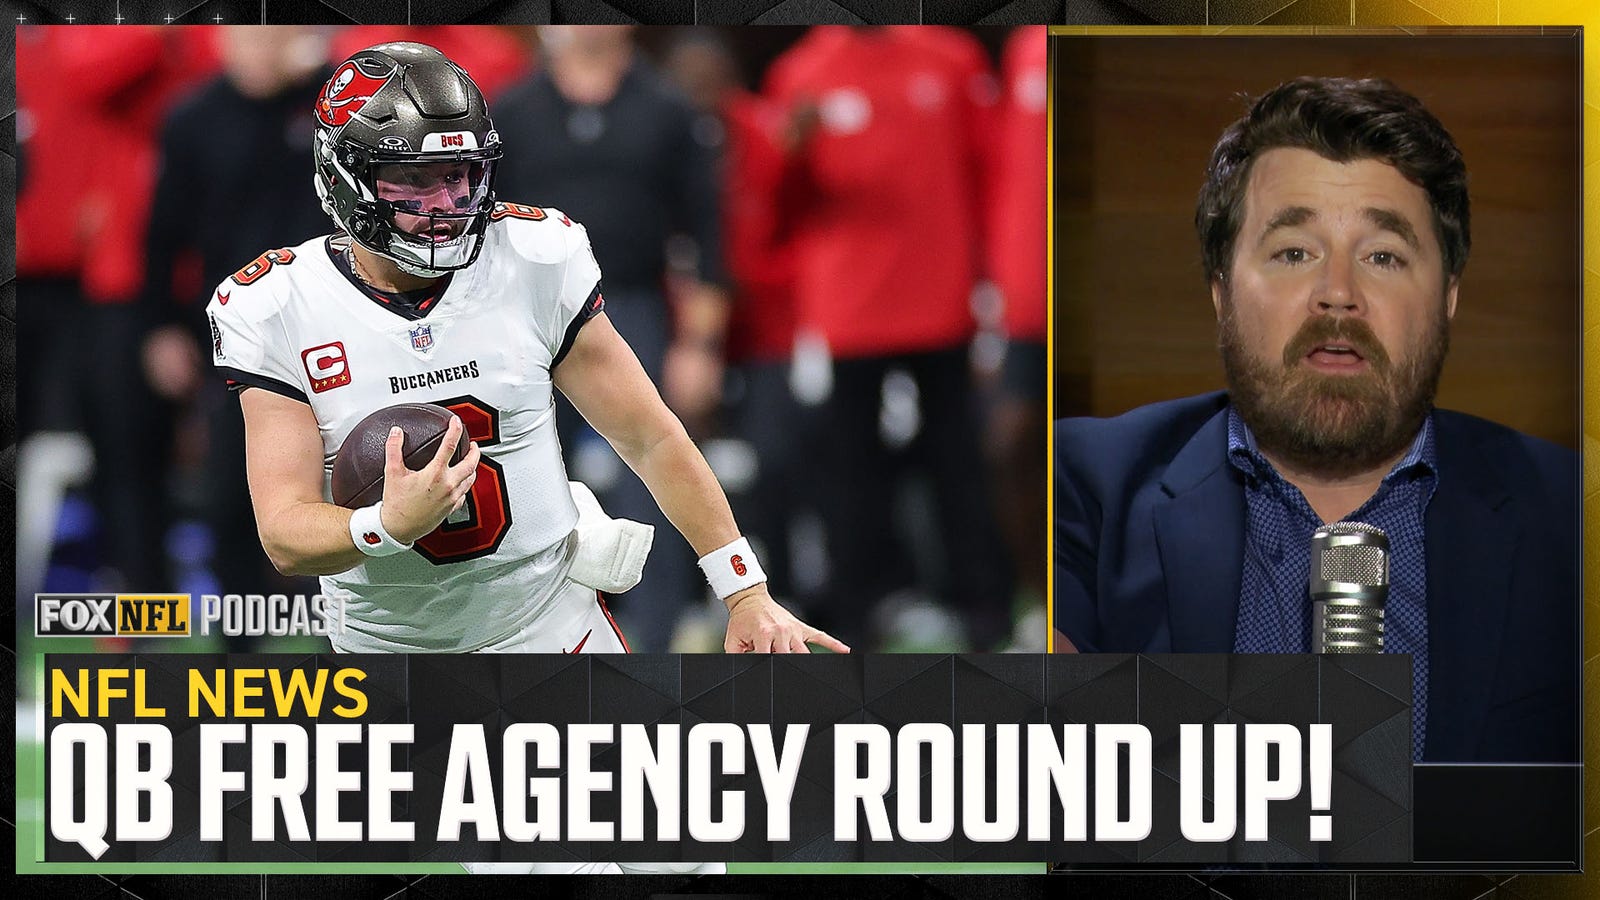 NFL QB free agency roundup ft. Baker Mayfield, Russell Wilson & Kirk Cousins